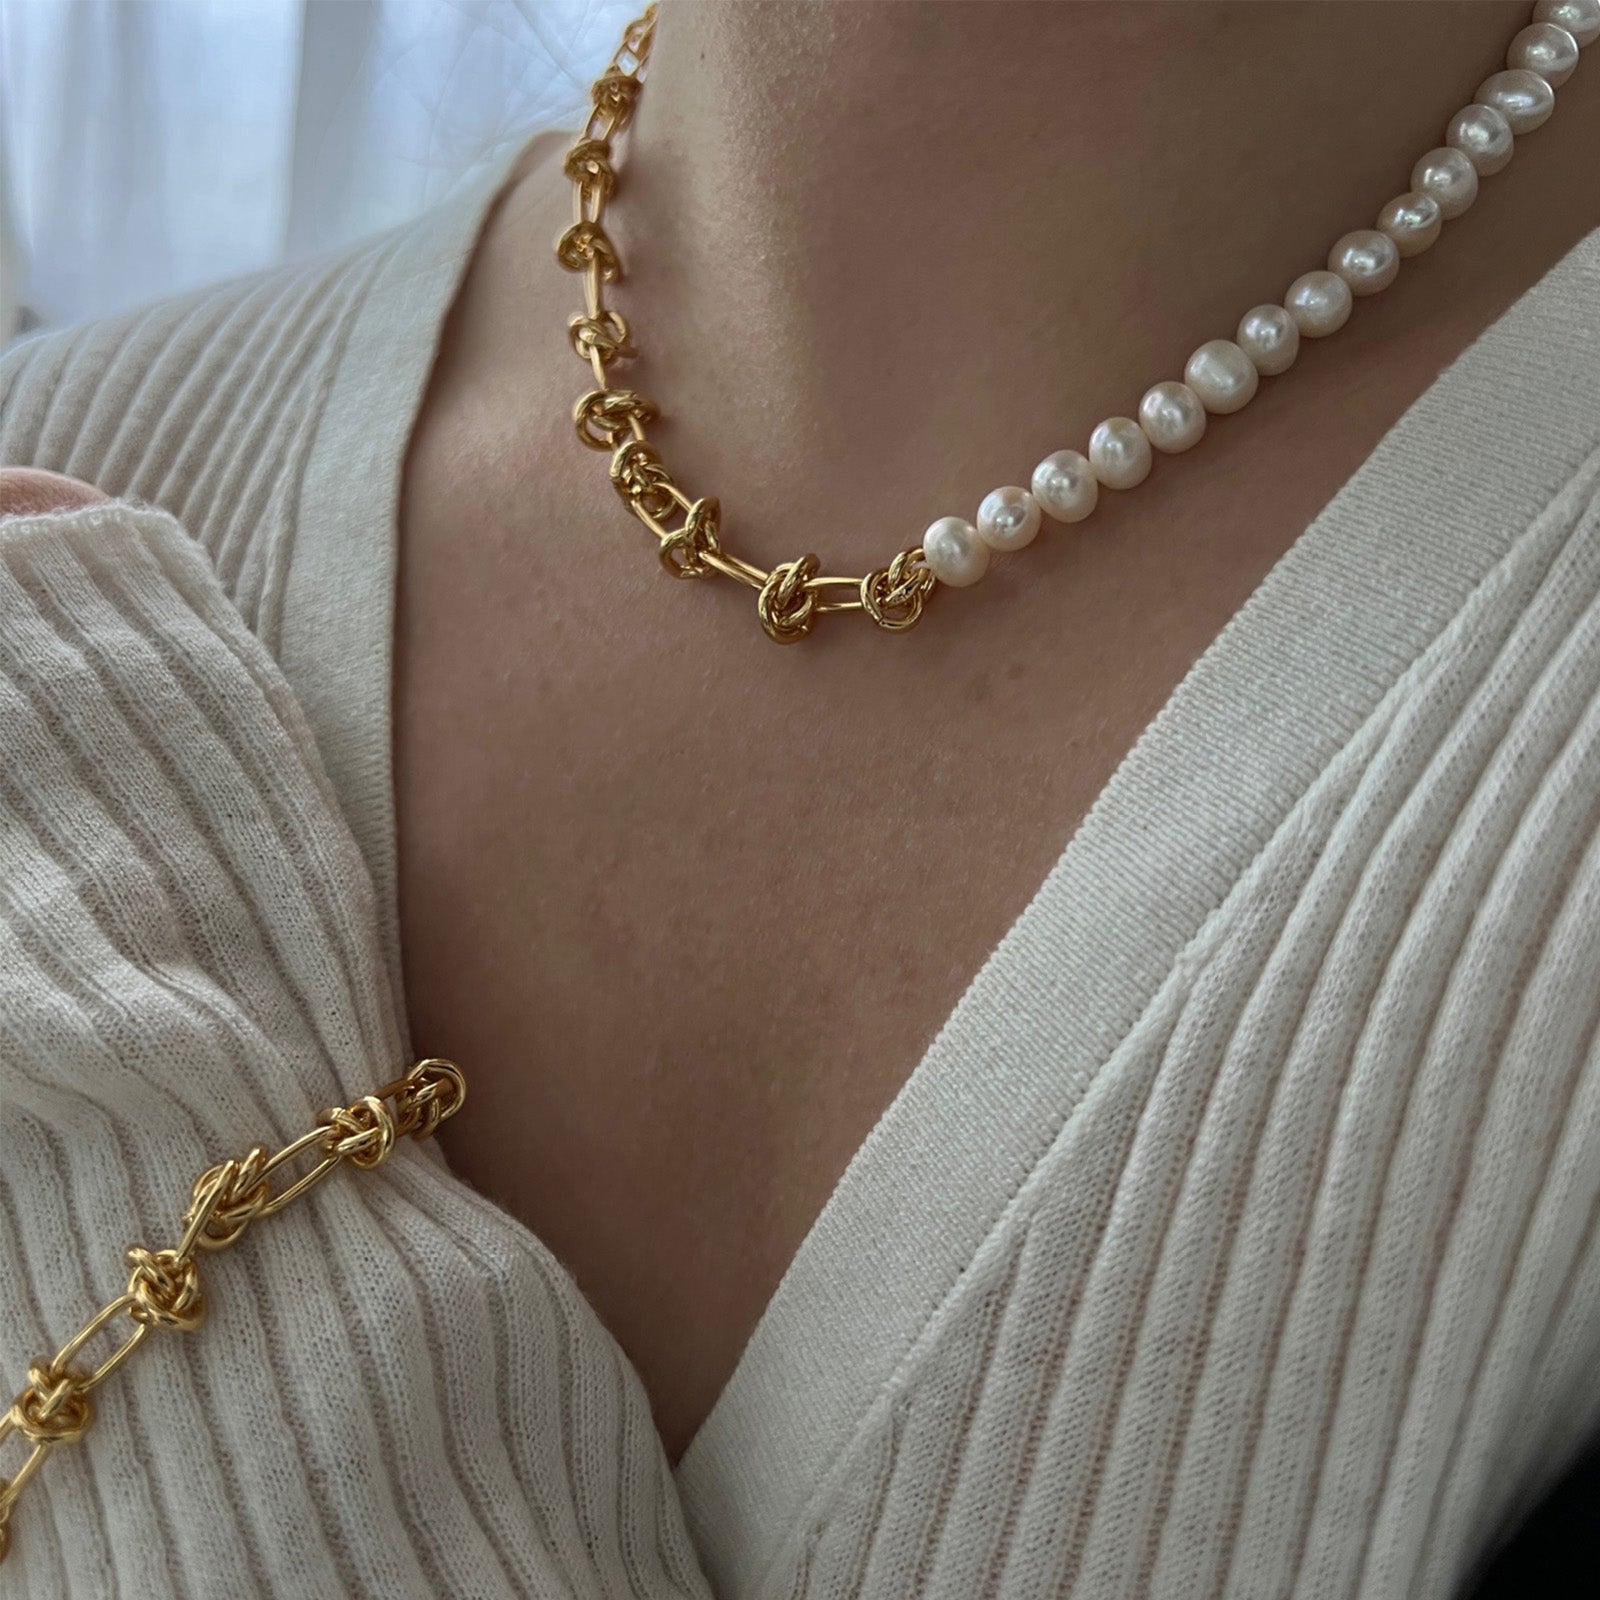 Molten Baroque Pearl Twisted Chain Bracelet, sculpted to perfection with gold details, this bracelet exudes opulence and sophistication, making it a statement piece for any occasion